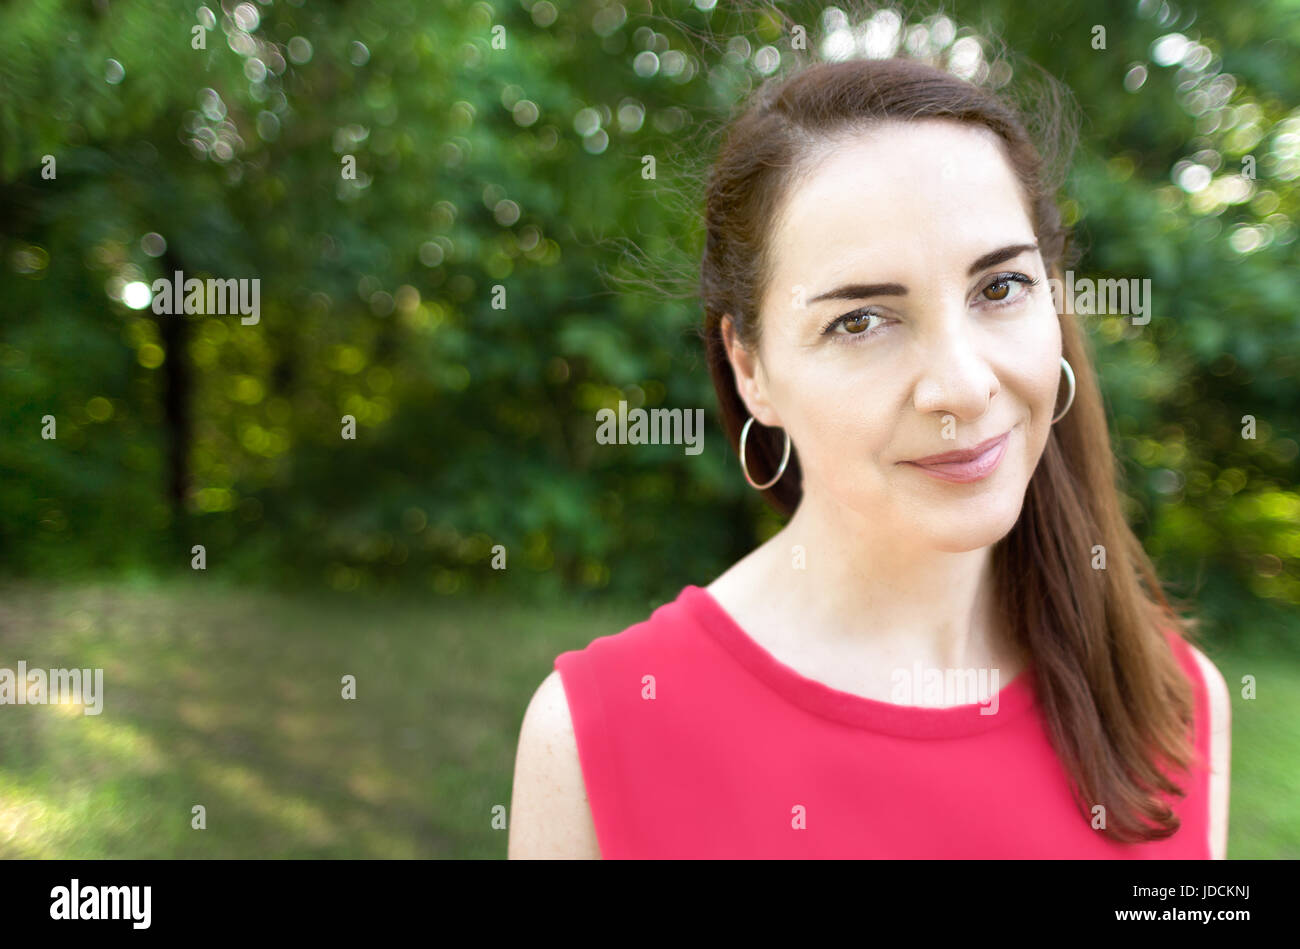 Portrait of a woman looking at camera, outdoors at a park, natural light, expressive eyes. Stock Photo